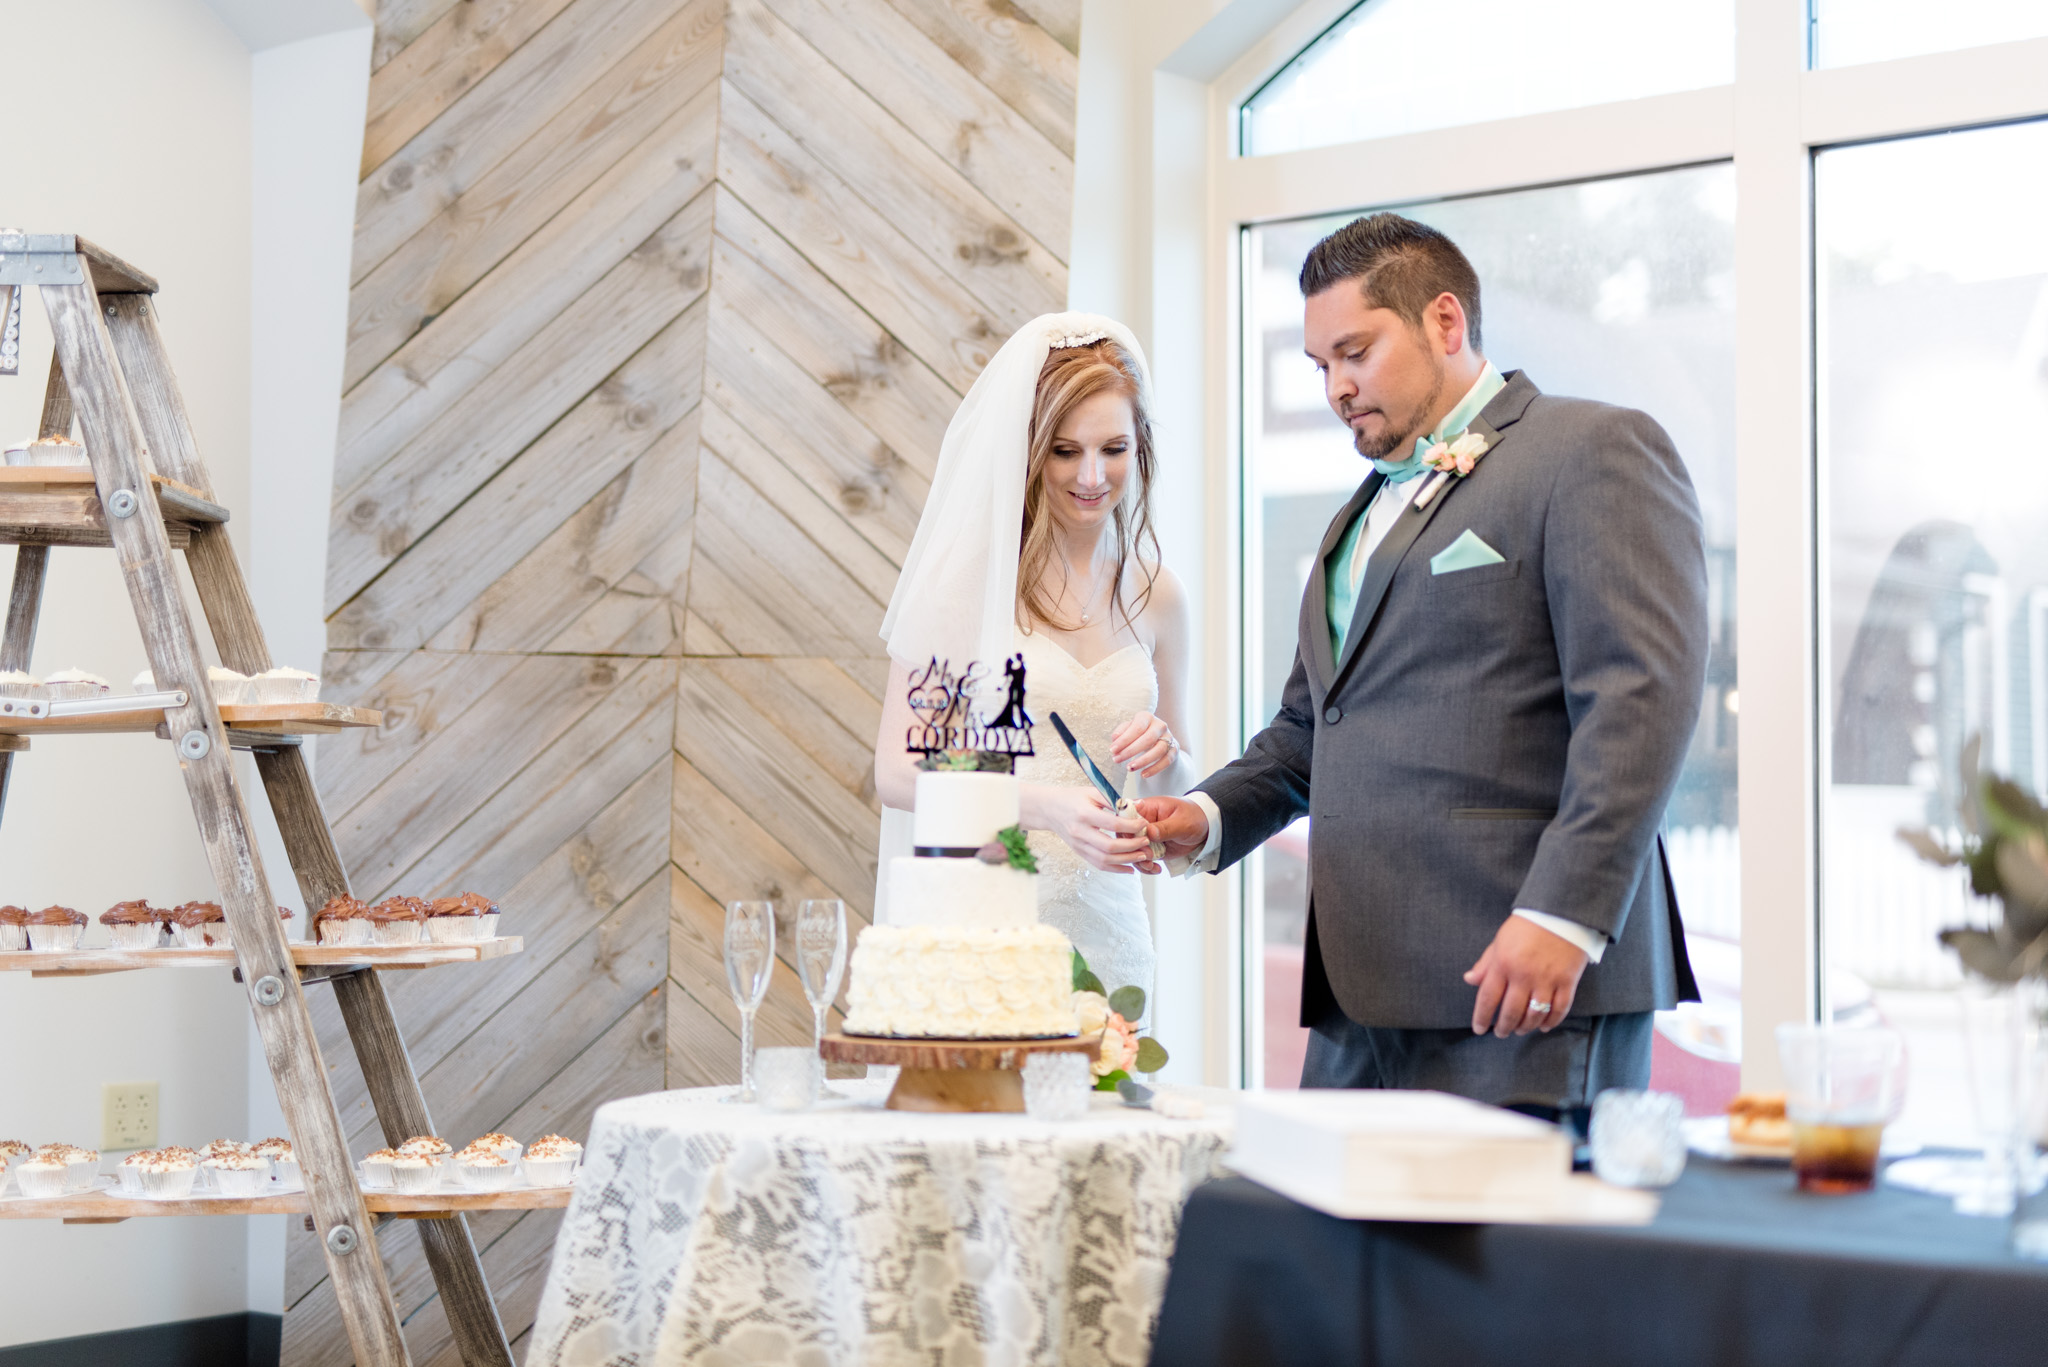 Bride and groom cut the cake.